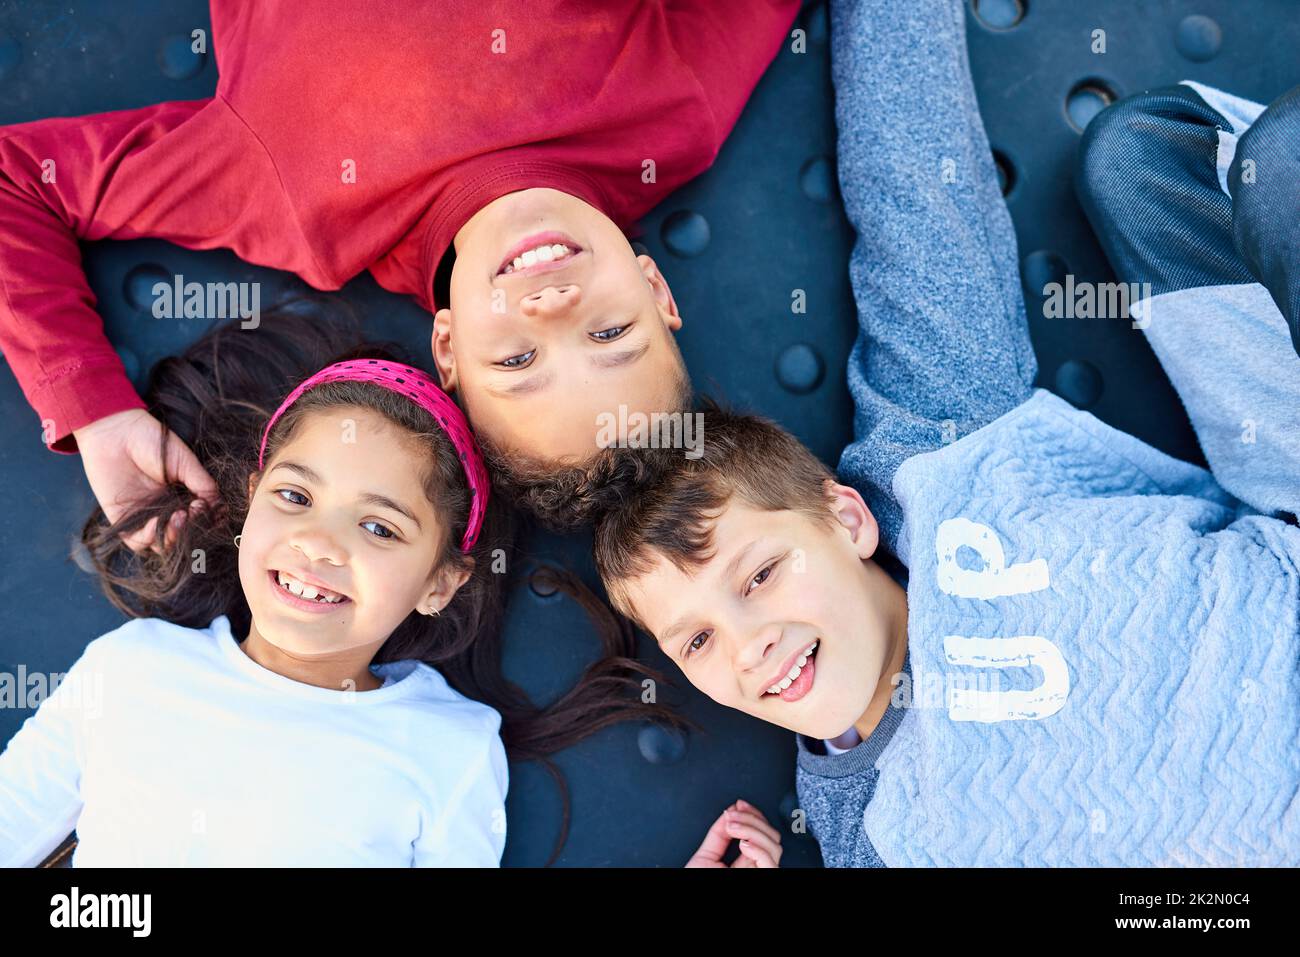 Childhood bliss. Portrait of three young siblings playing together at the park. Stock Photo